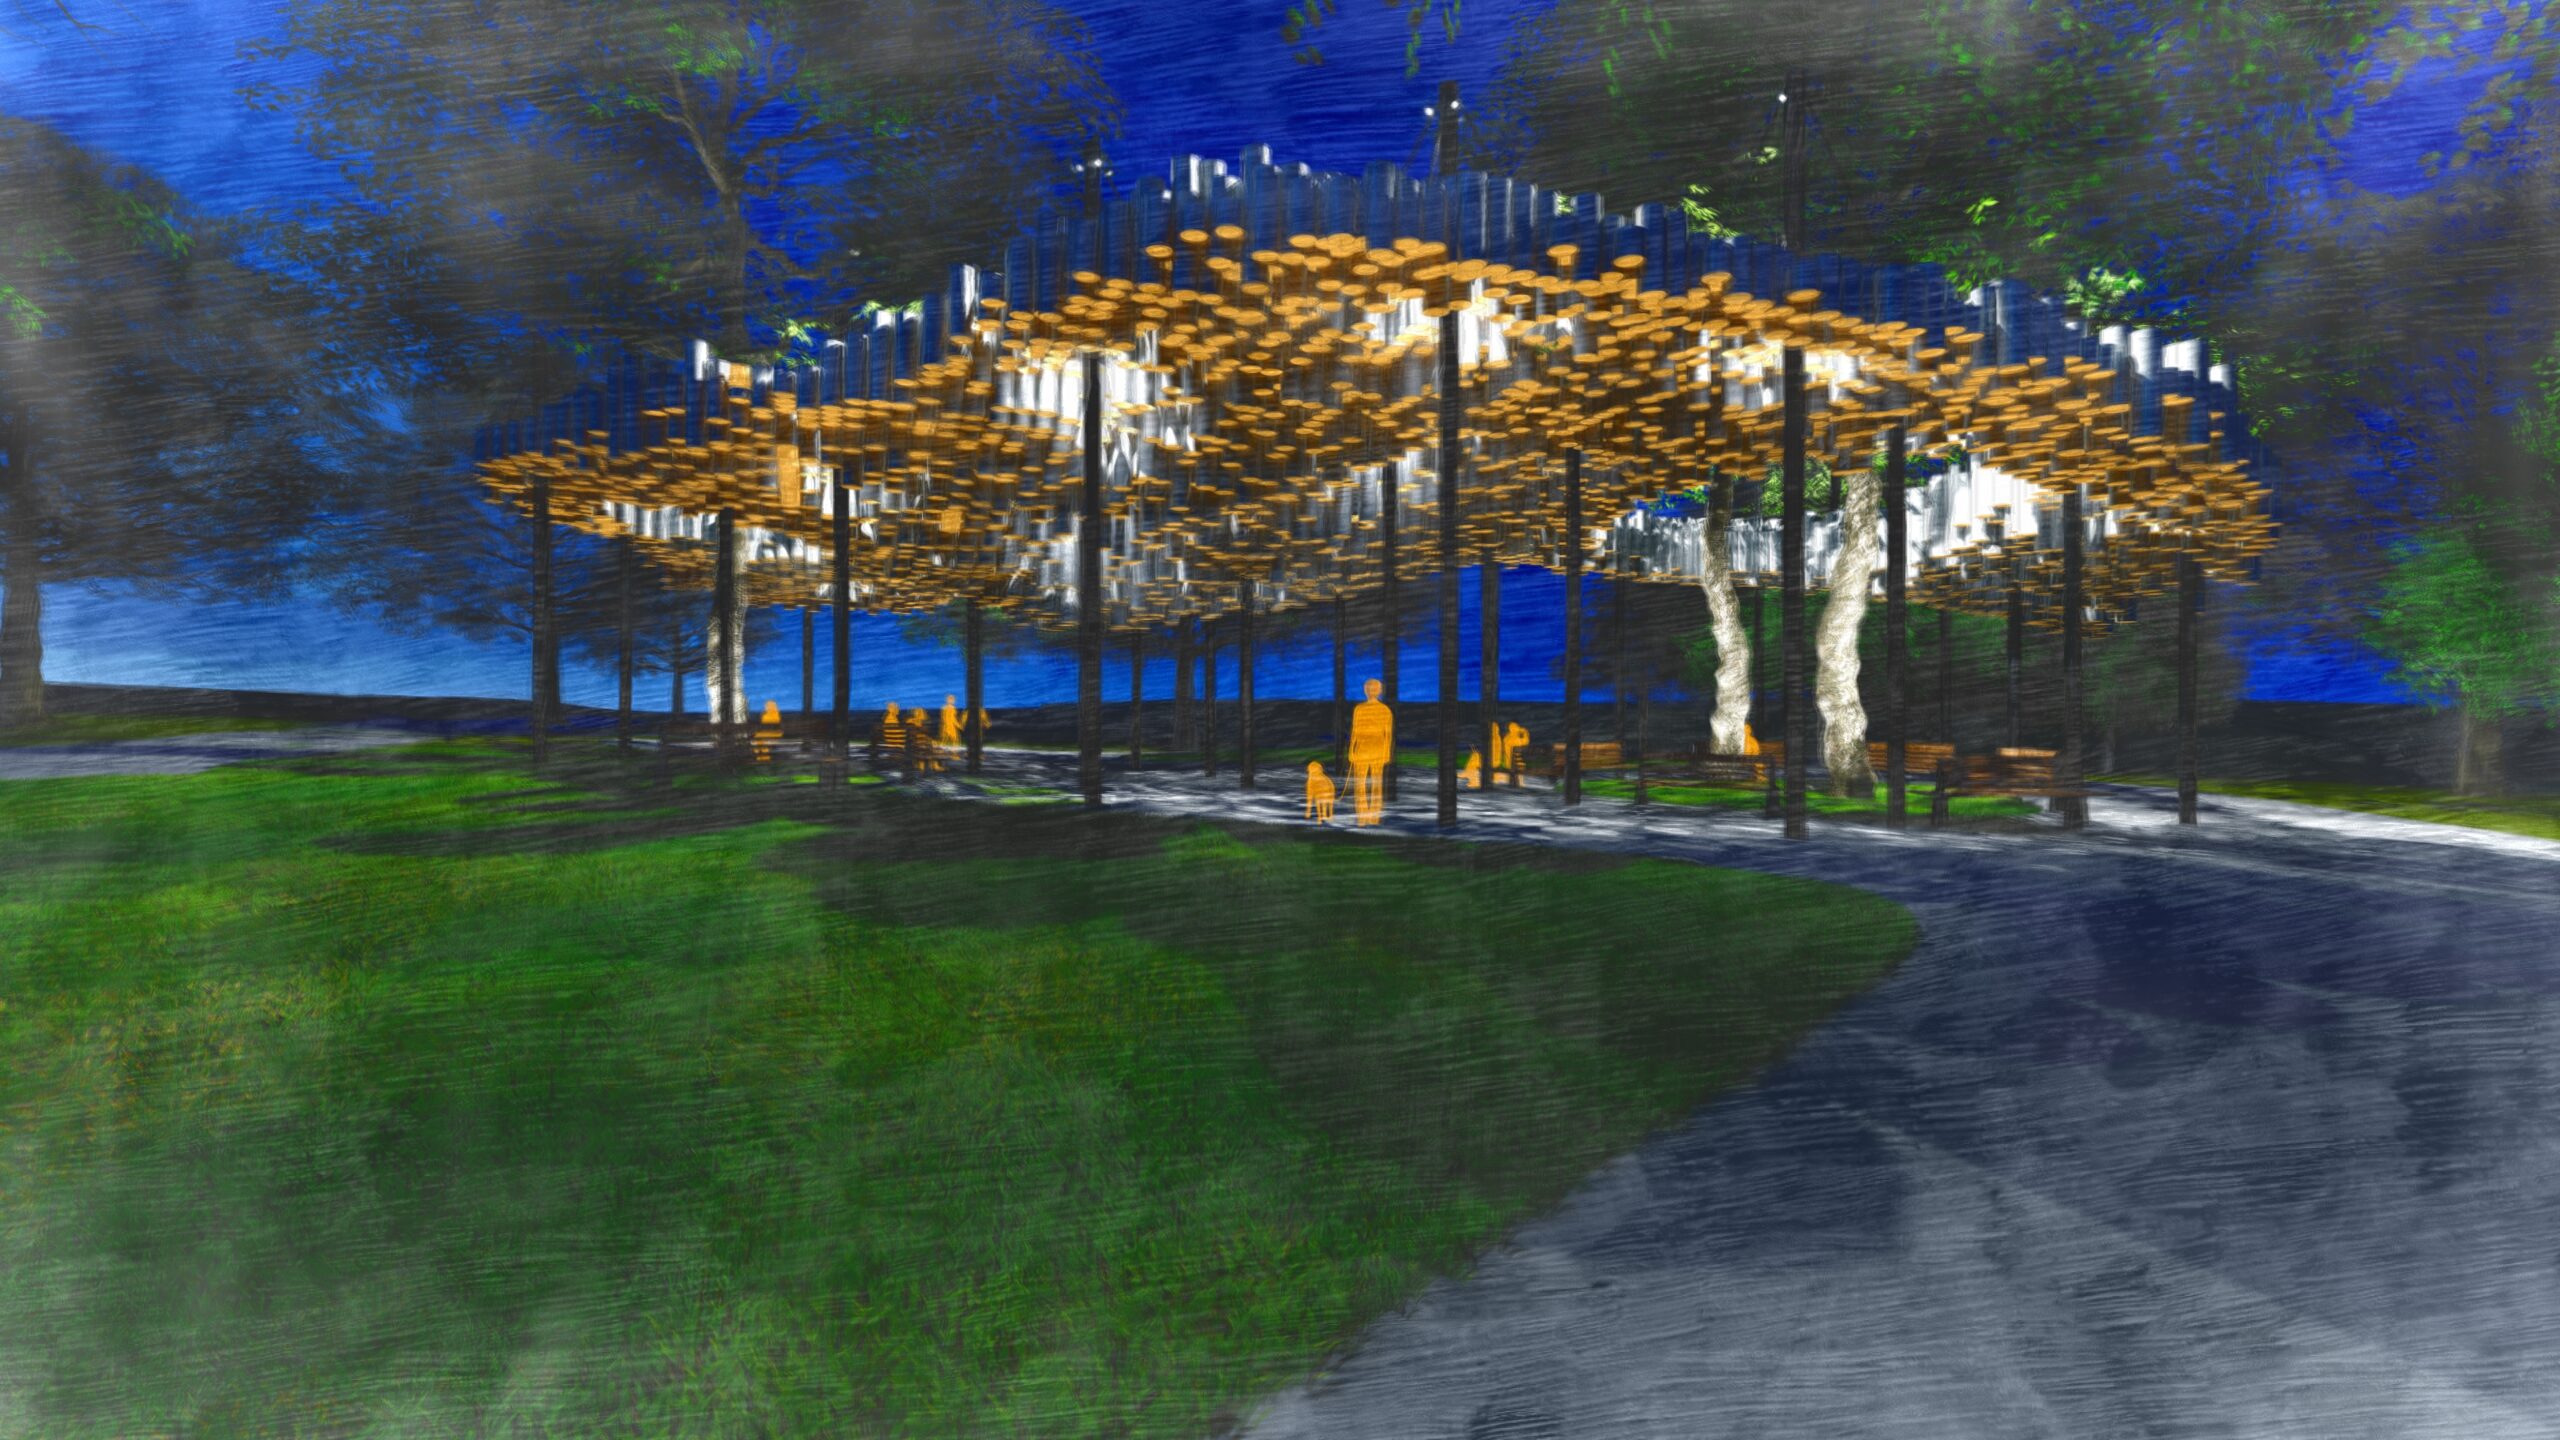 Nighttime rendering of a lit pavilion structure over benches.